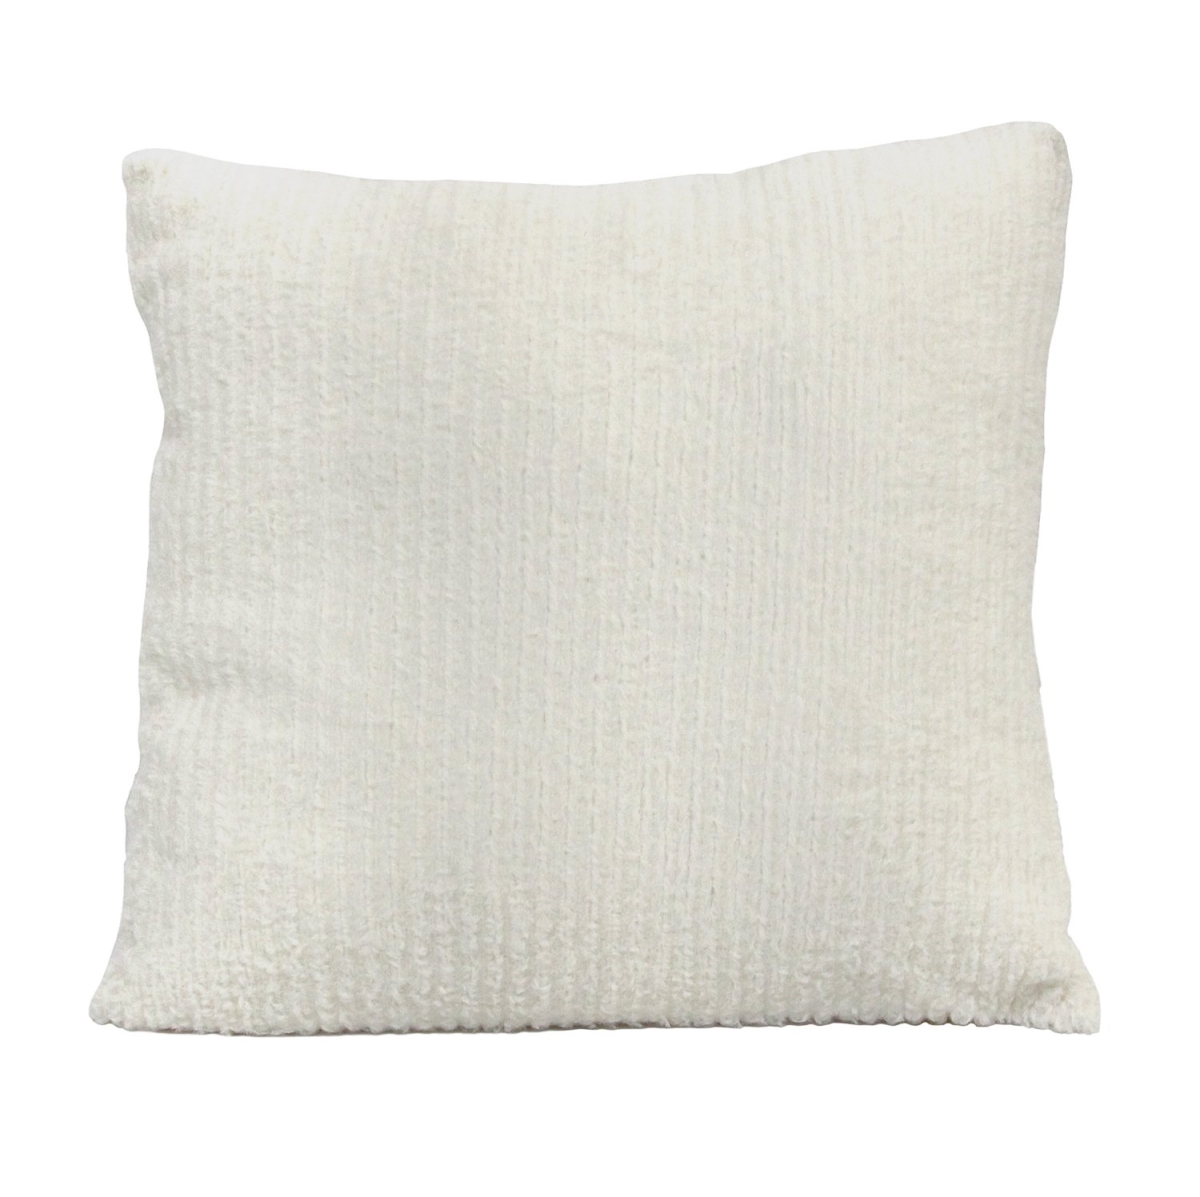 Home Roots Beddings 329332 Faux Fur Pillow, White